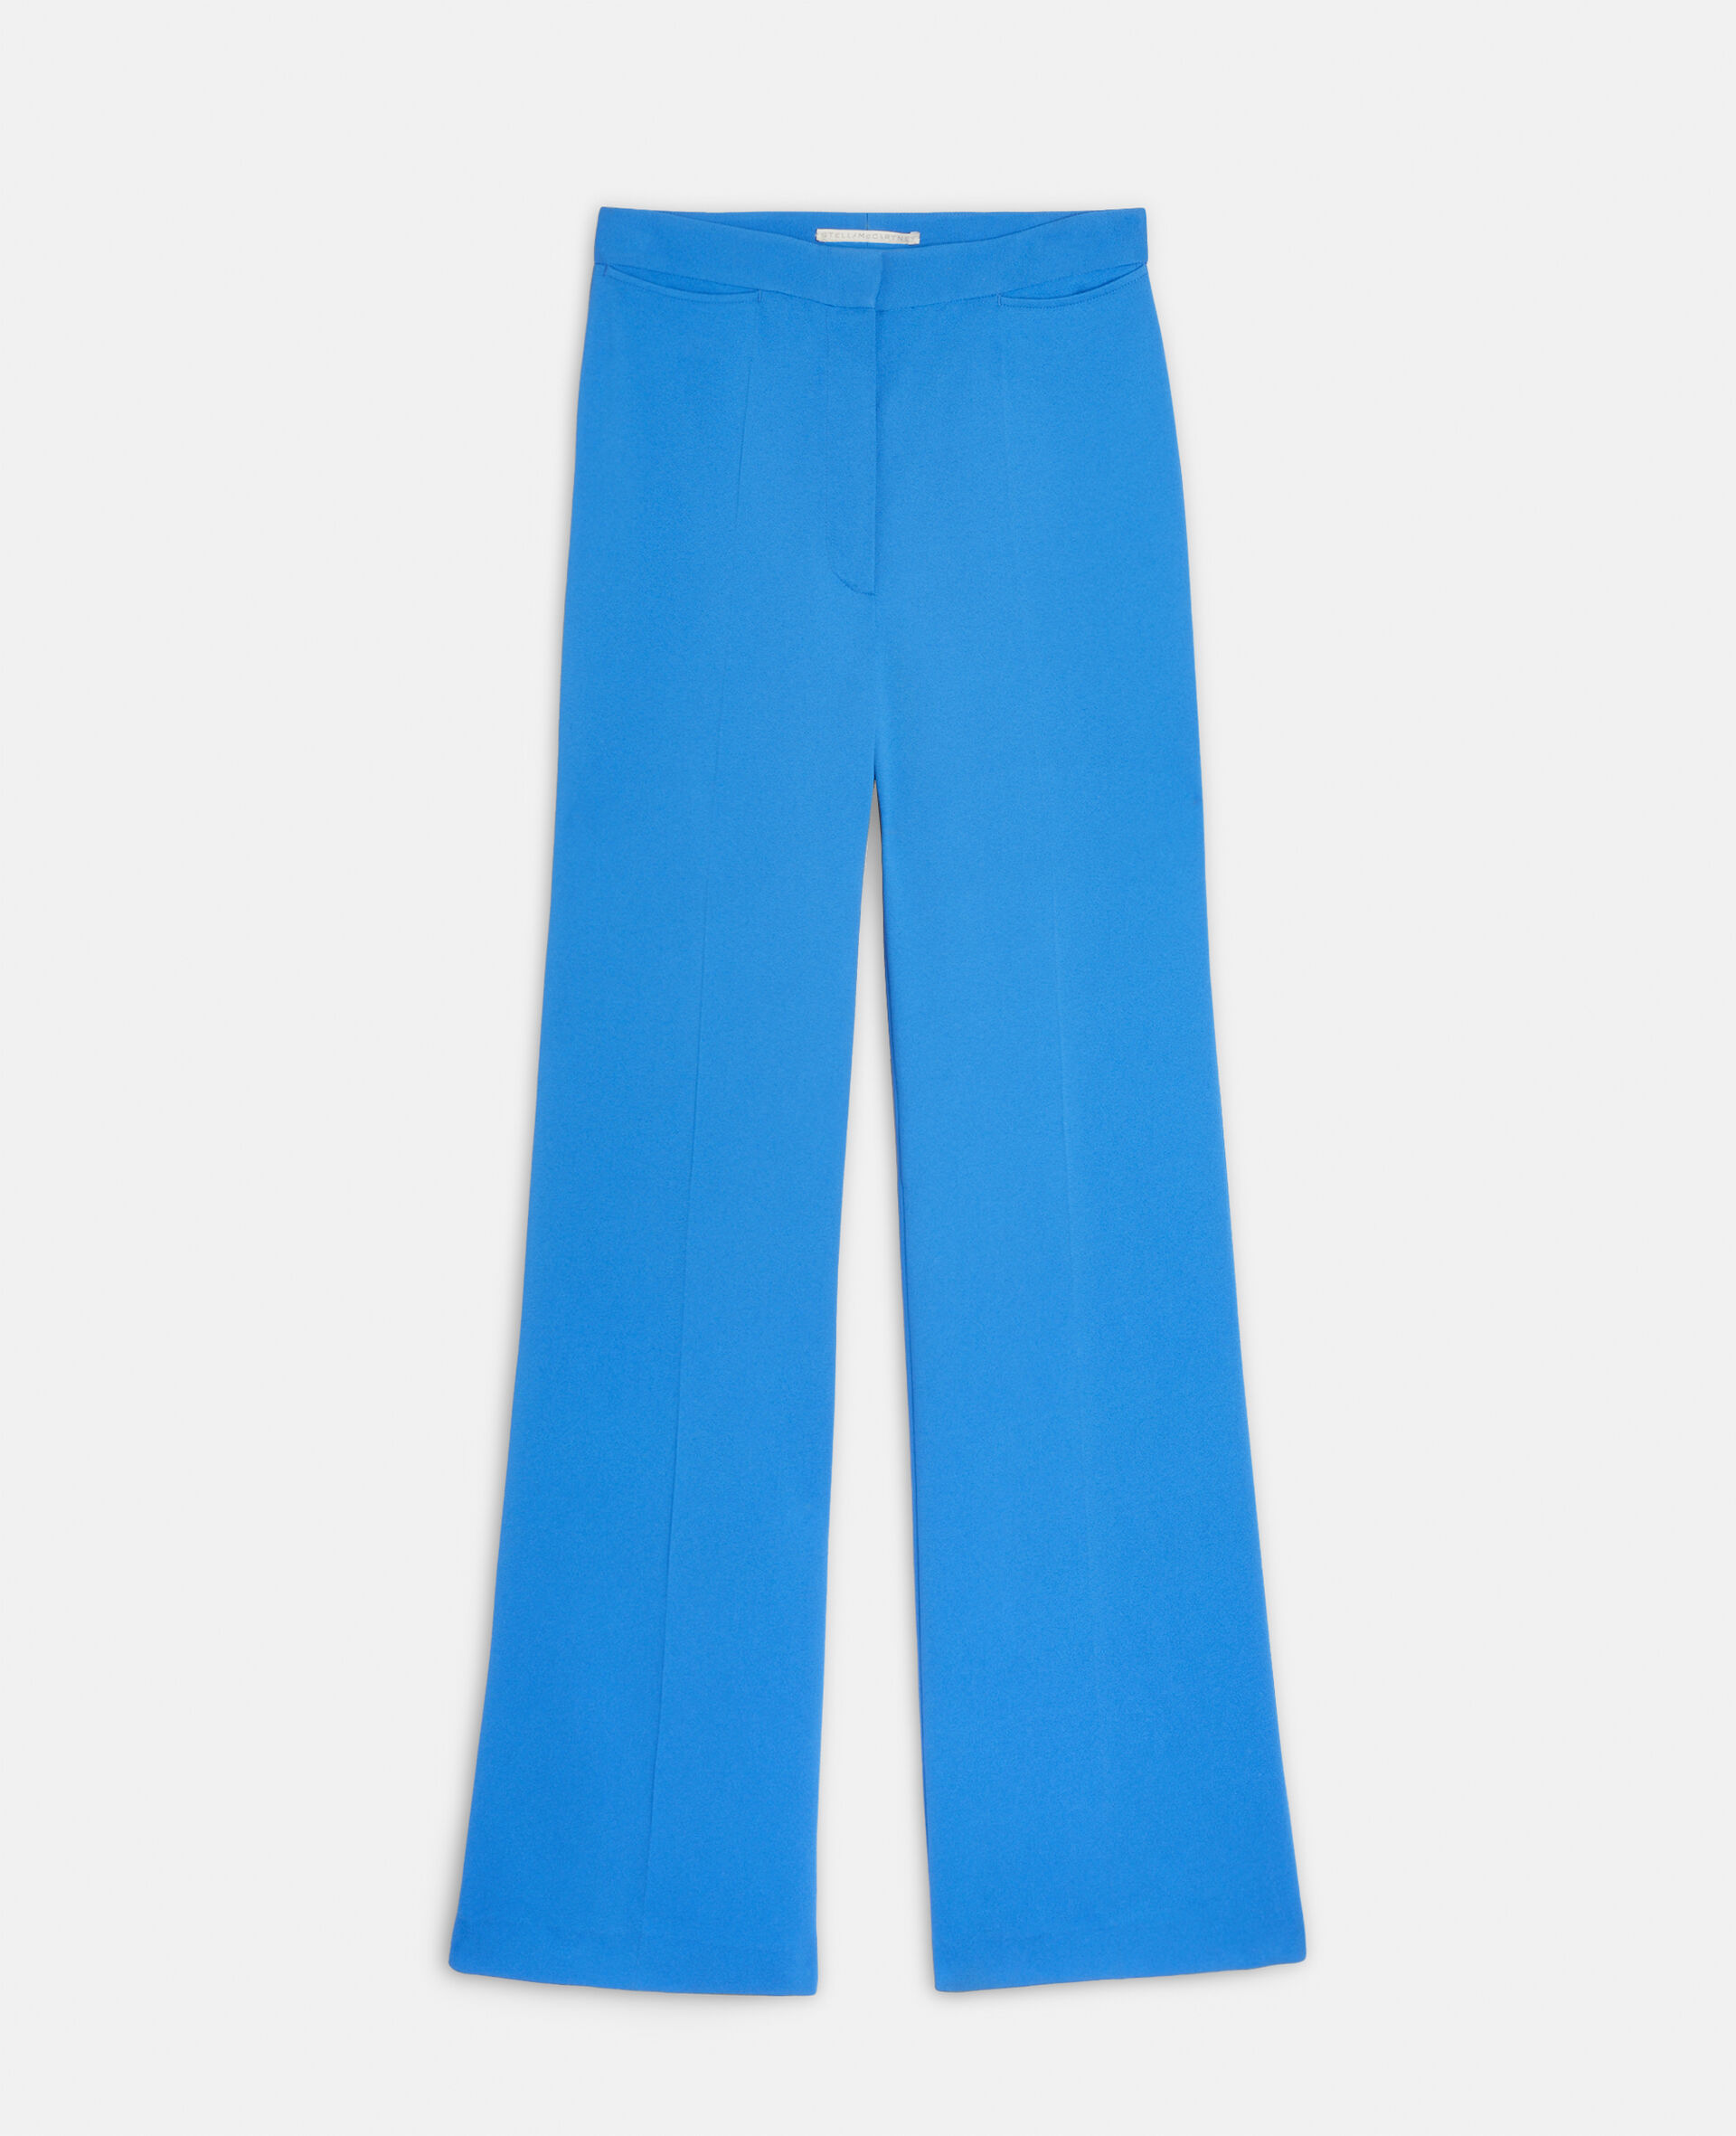 Tailored Twill Trousers-Blue-large